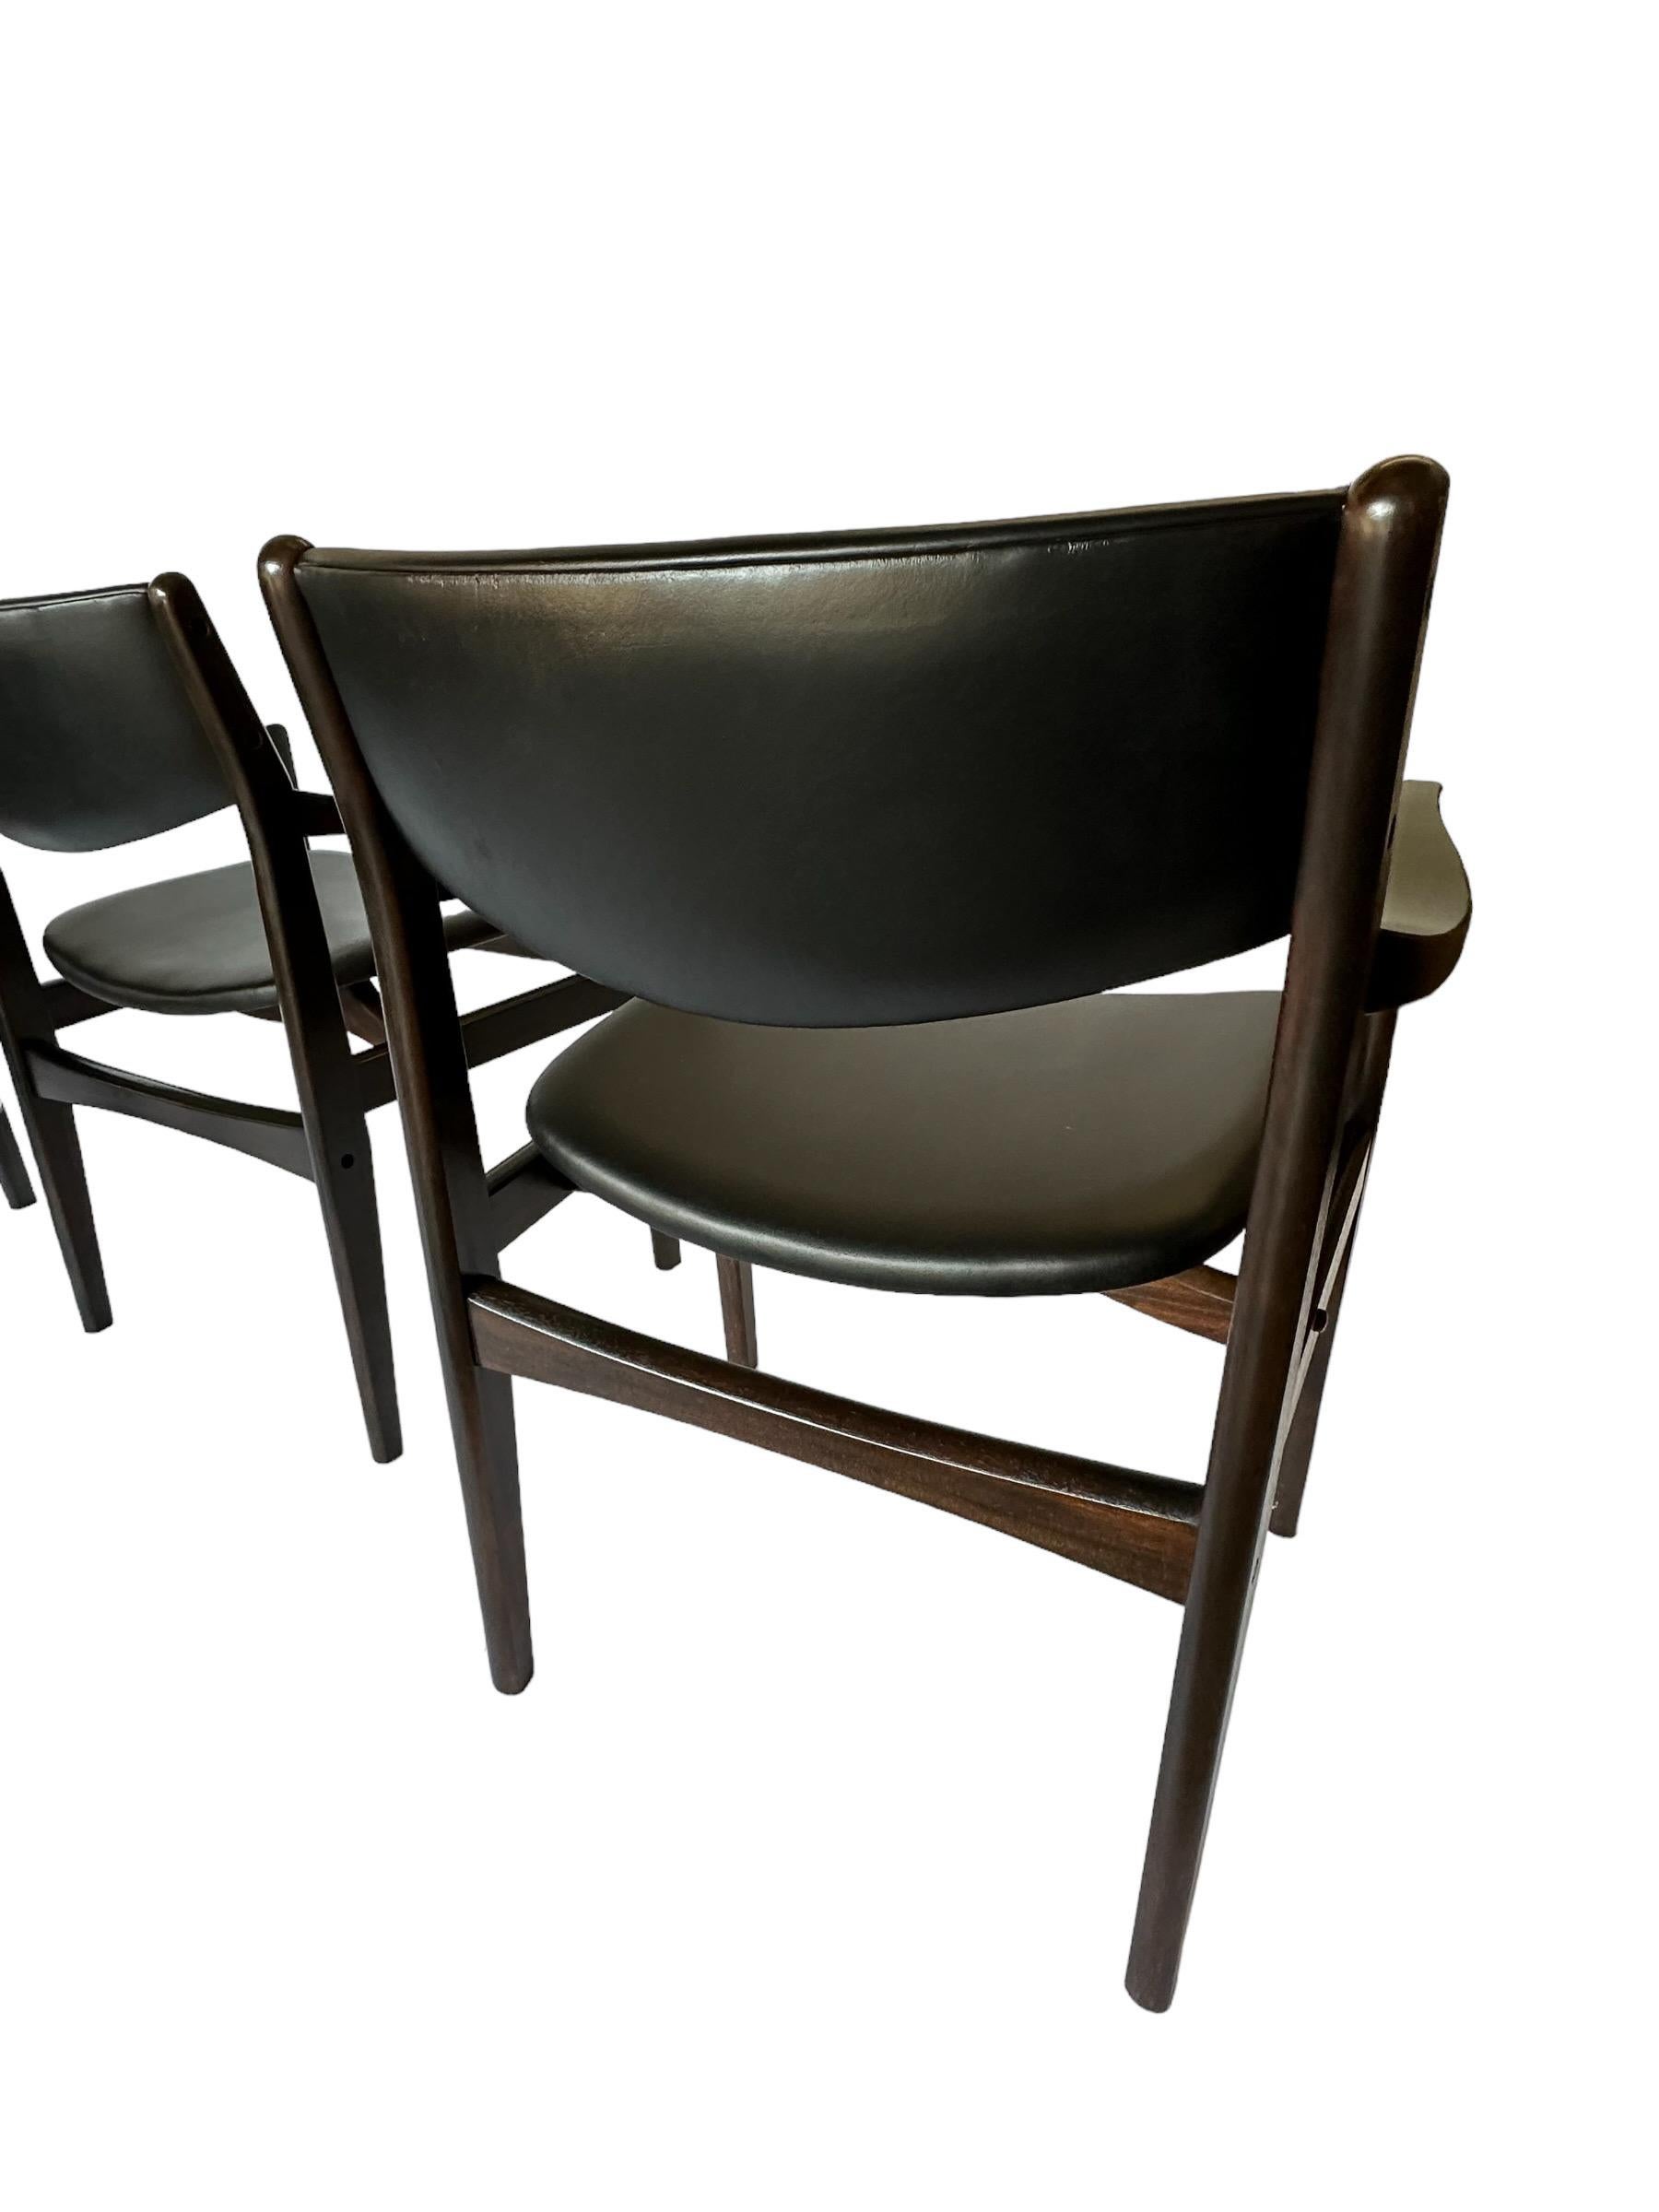 Set of 4 Midcentury Modern Danish Style Hardwood Dining Chairs For Sale 12